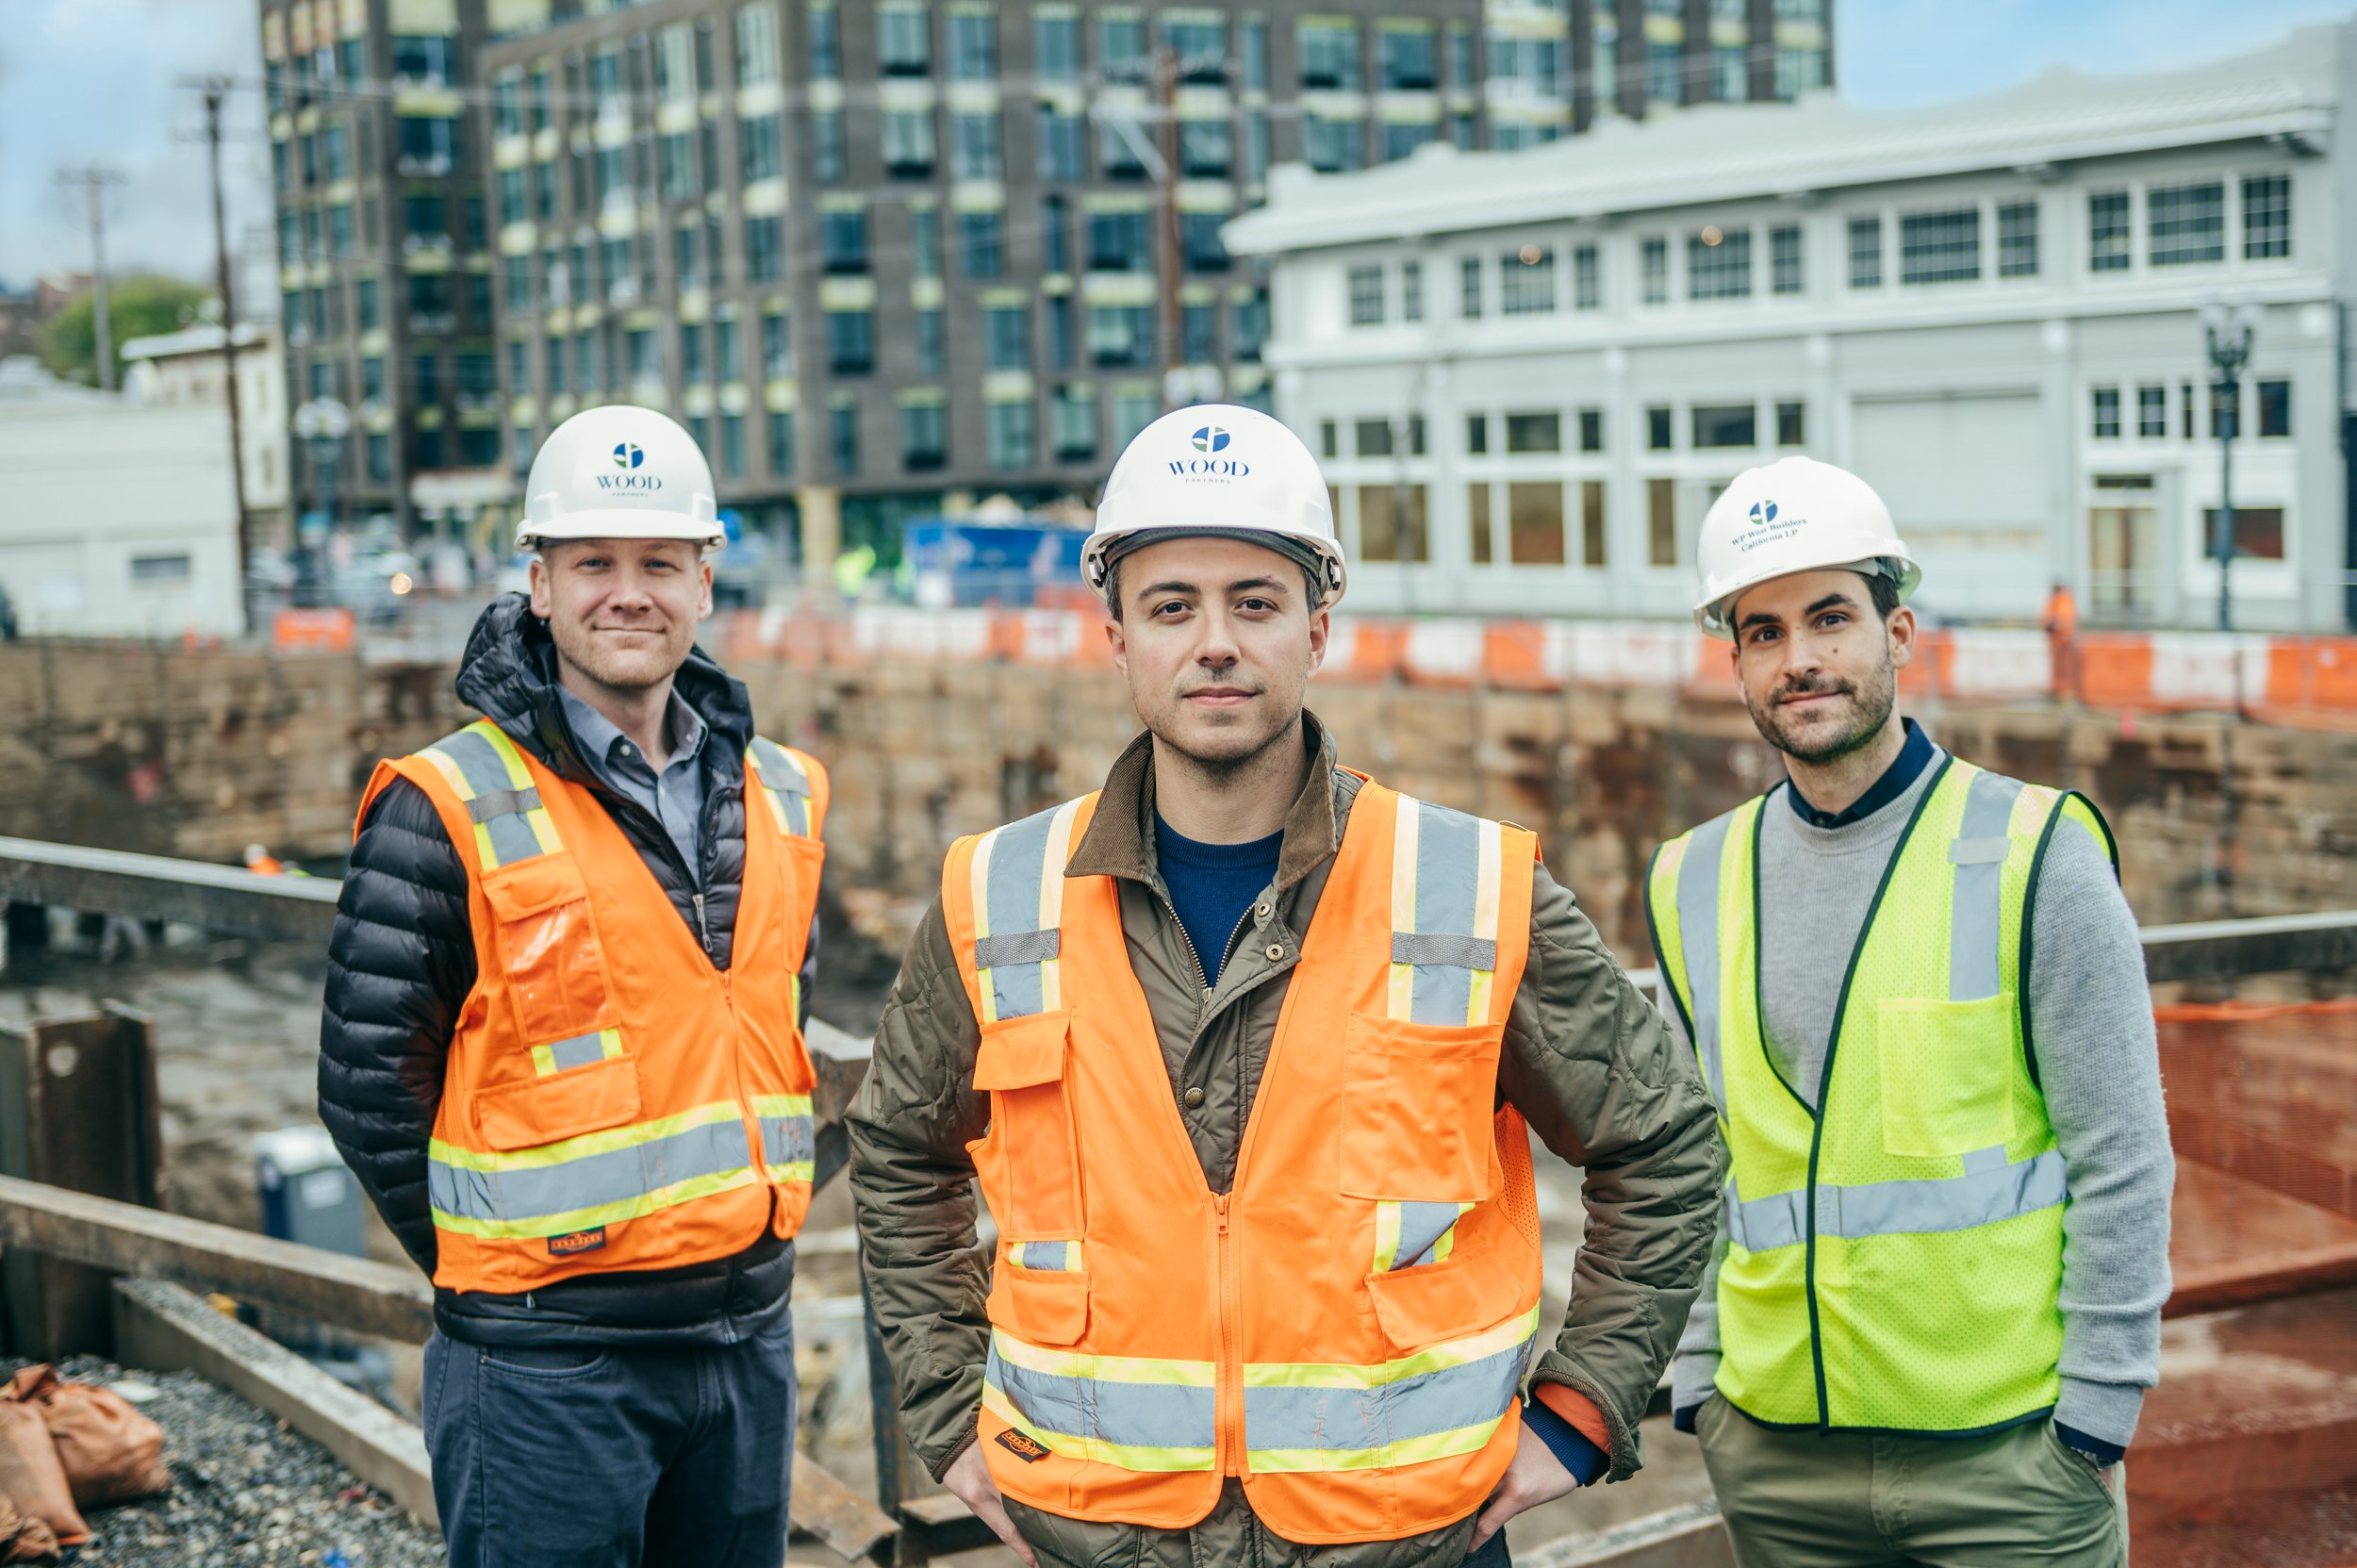 The professionals in property development standing together, ready to work on a construction site.